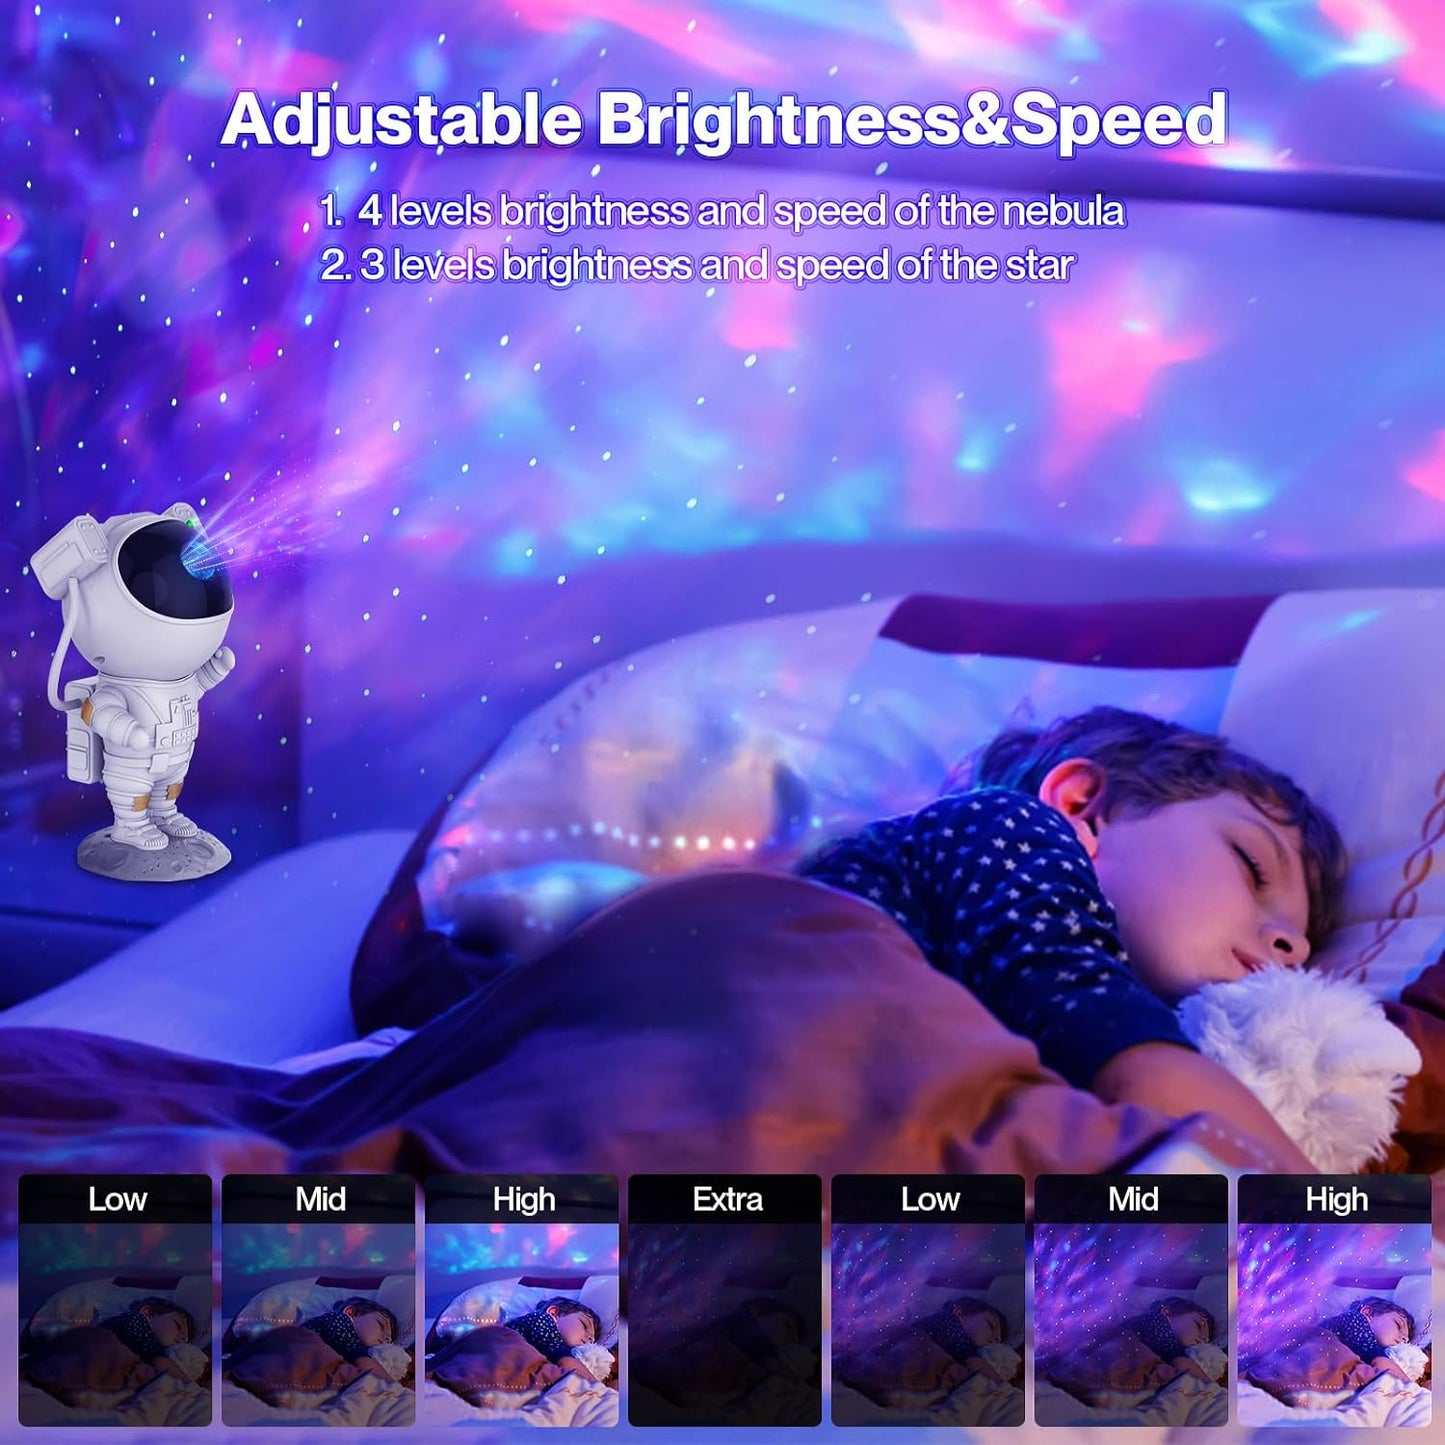 Astronaut Star Projector, Galaxy Projector Night Light, Astronaut Starry Nebula Ceiling Projection Lamp with Timer & Remote, Christmas Gift for Kids Adult for Bedroom, Room Decor, Party, Gaming Room